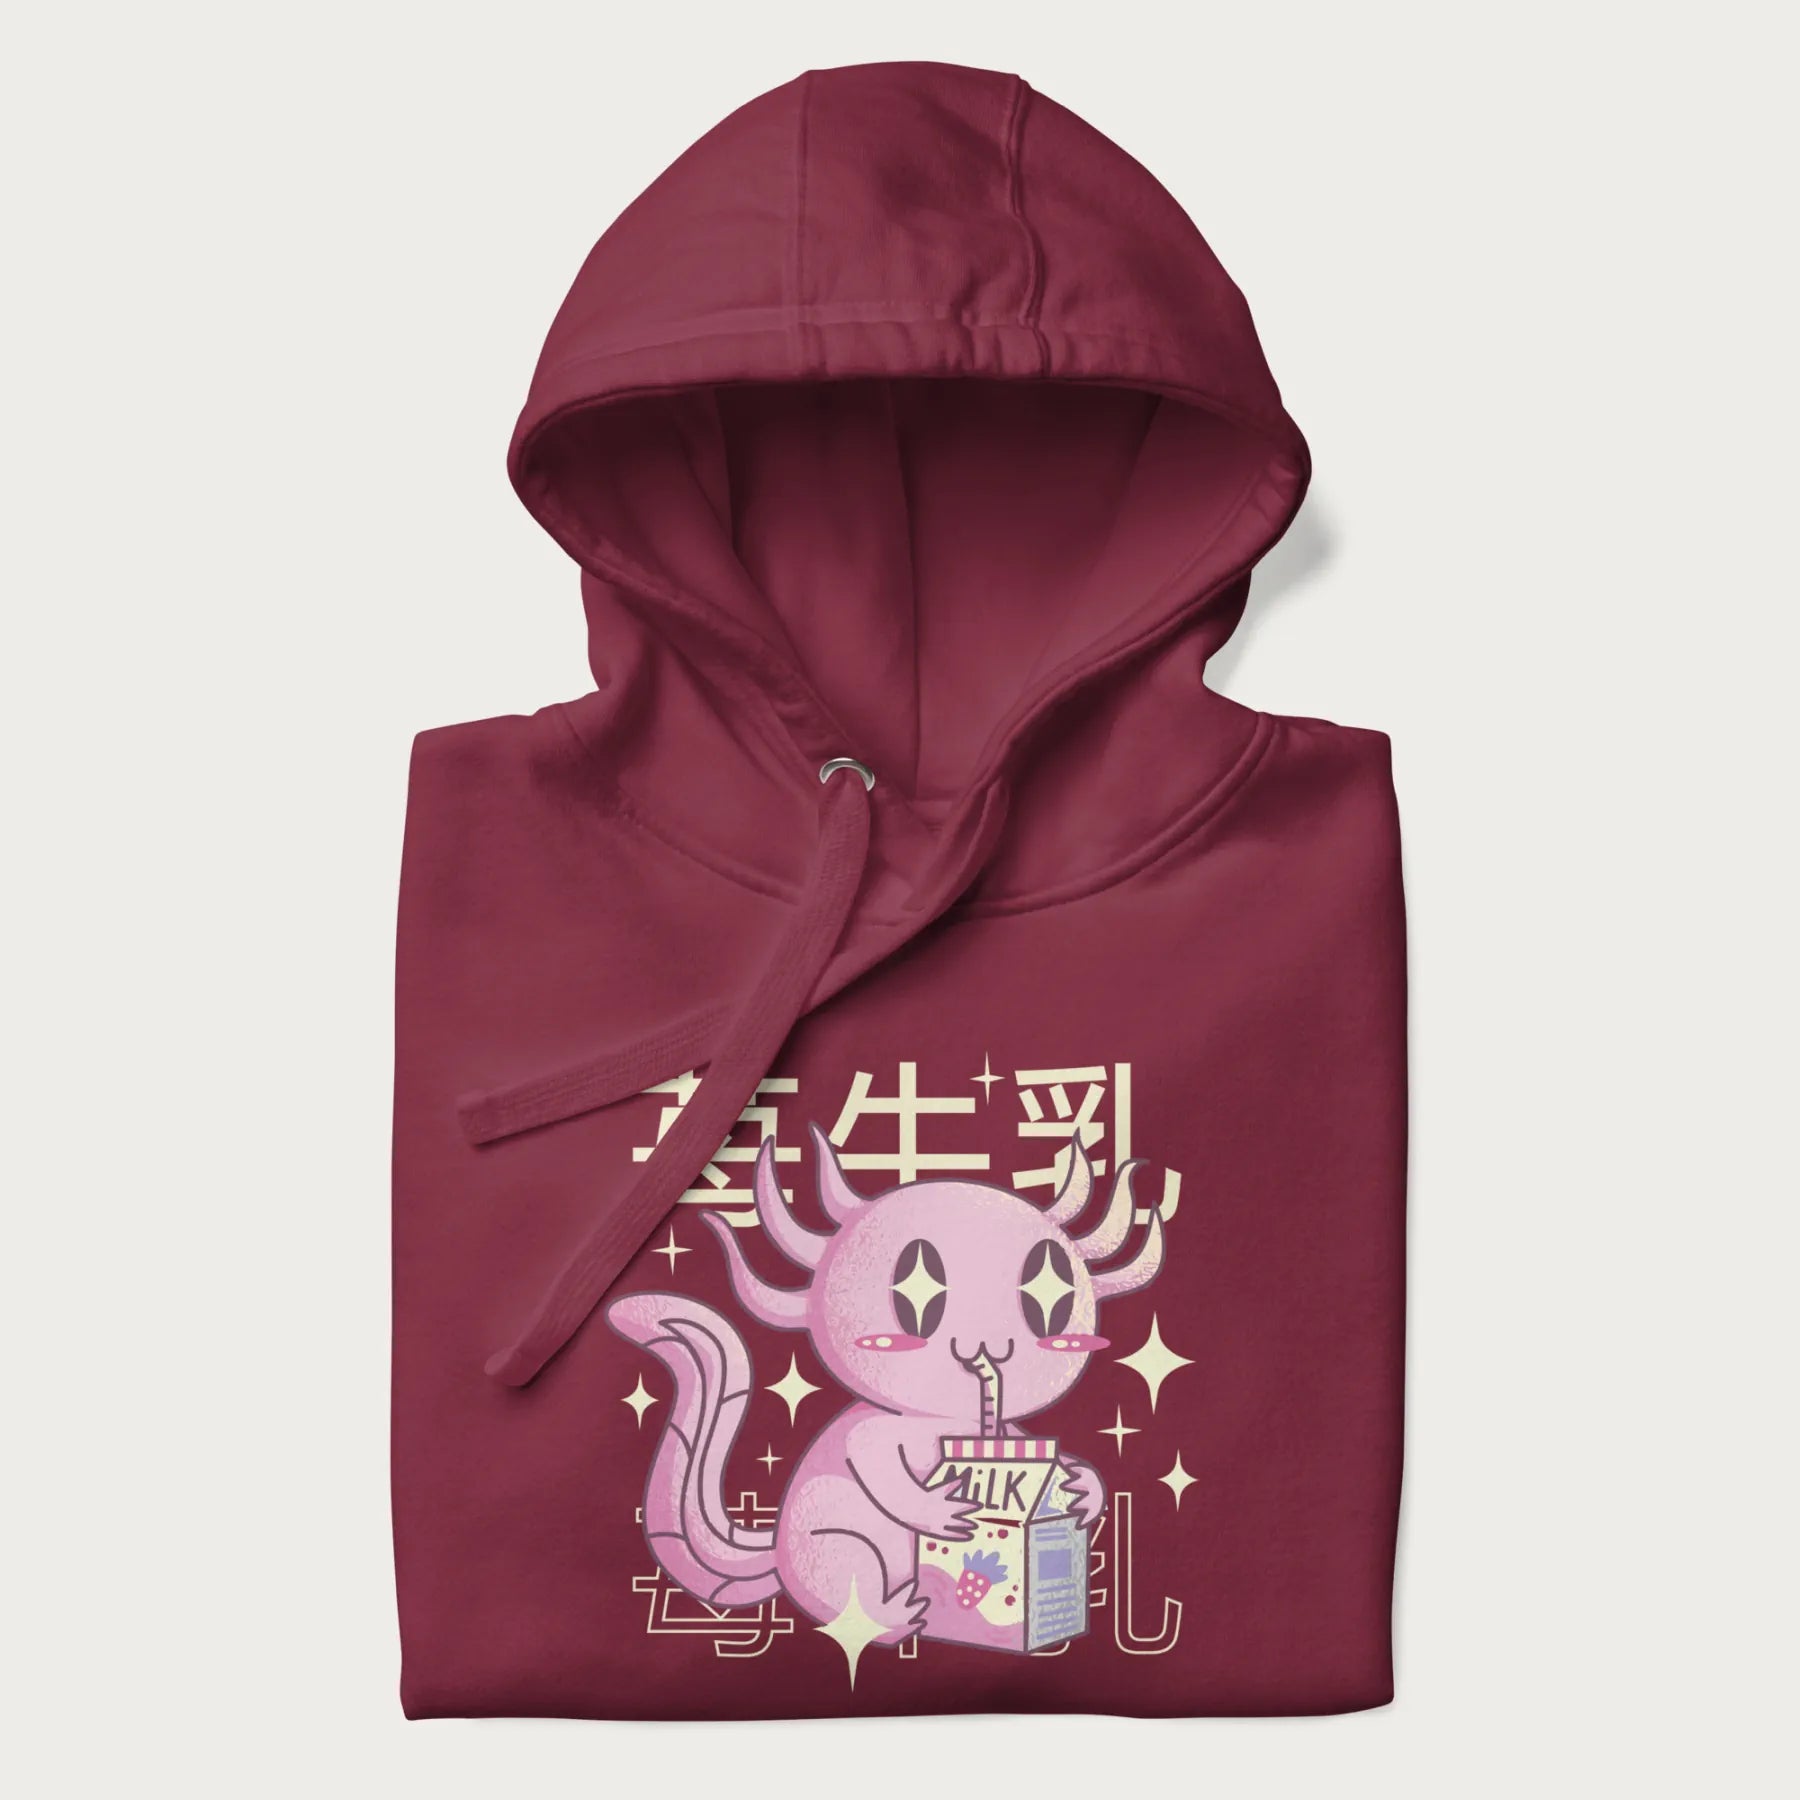 Folded maroon hoodie with Japanese graphic of a cute pink axolotl sipping strawberry milk from a carton, with Japanese text '苺牛乳' (Strawberry Milk).